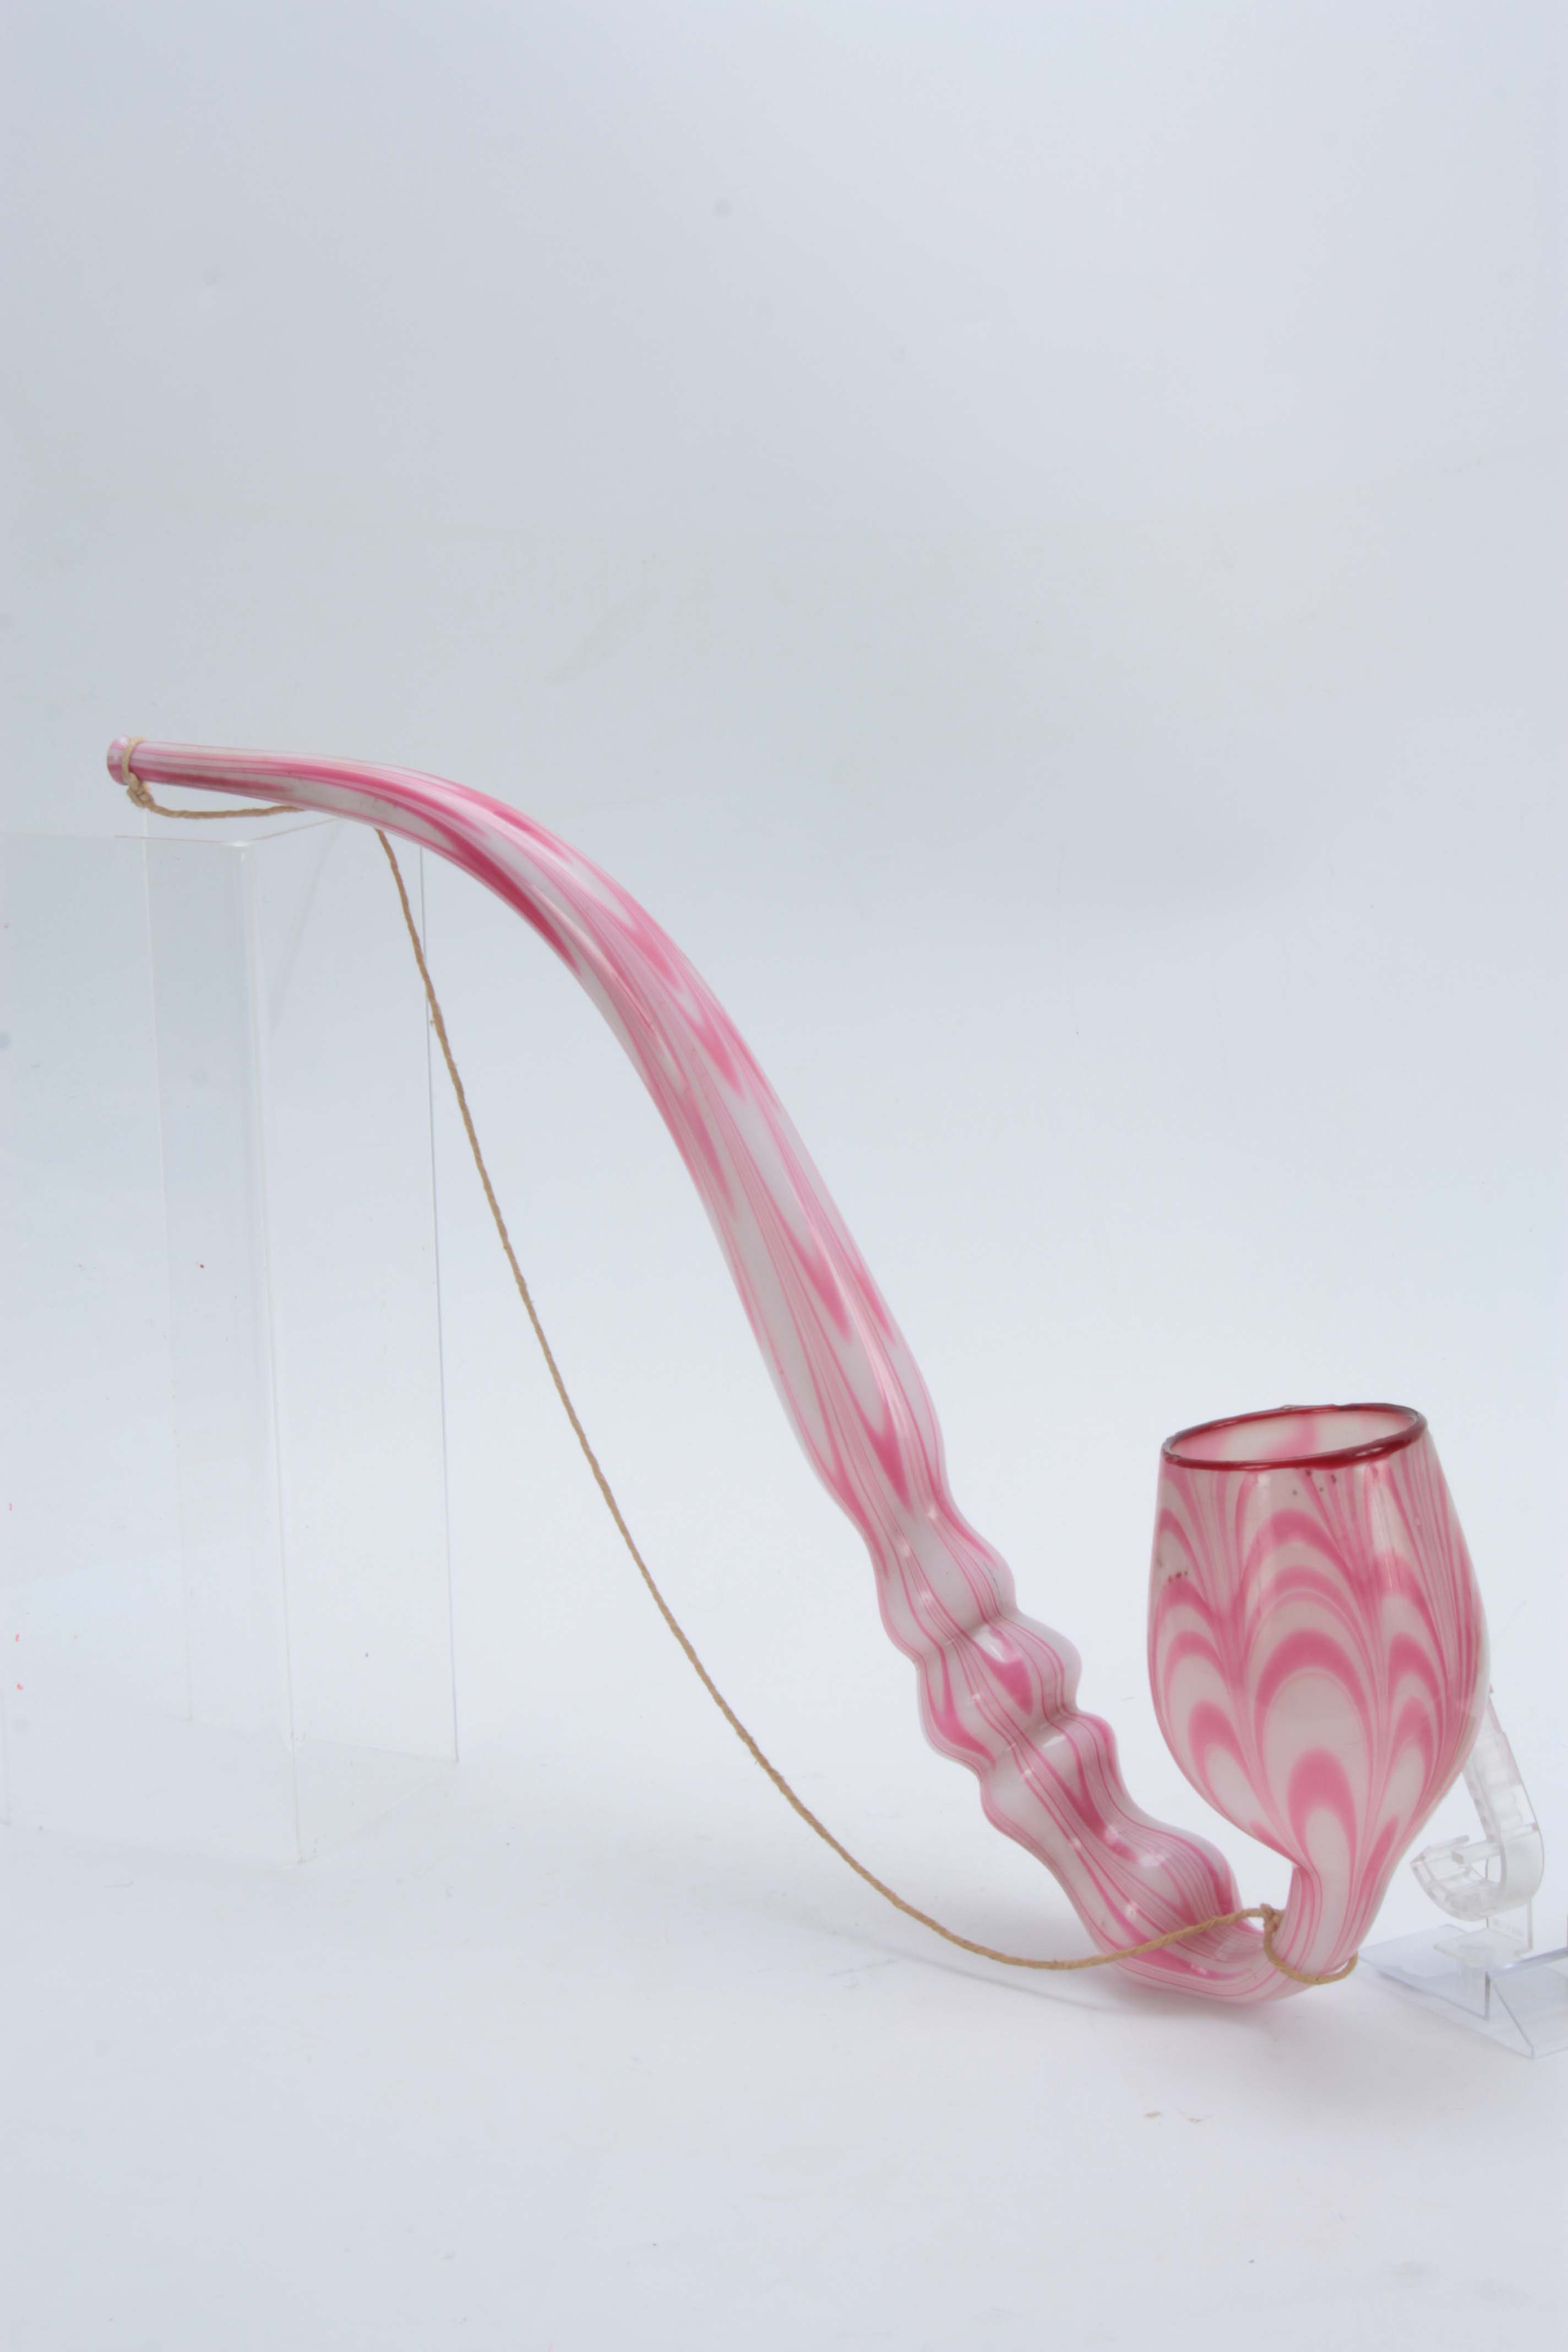 A LARGE 19TH CENTURY STOURBRIDGE GLASS PIPE of twi - Image 6 of 10